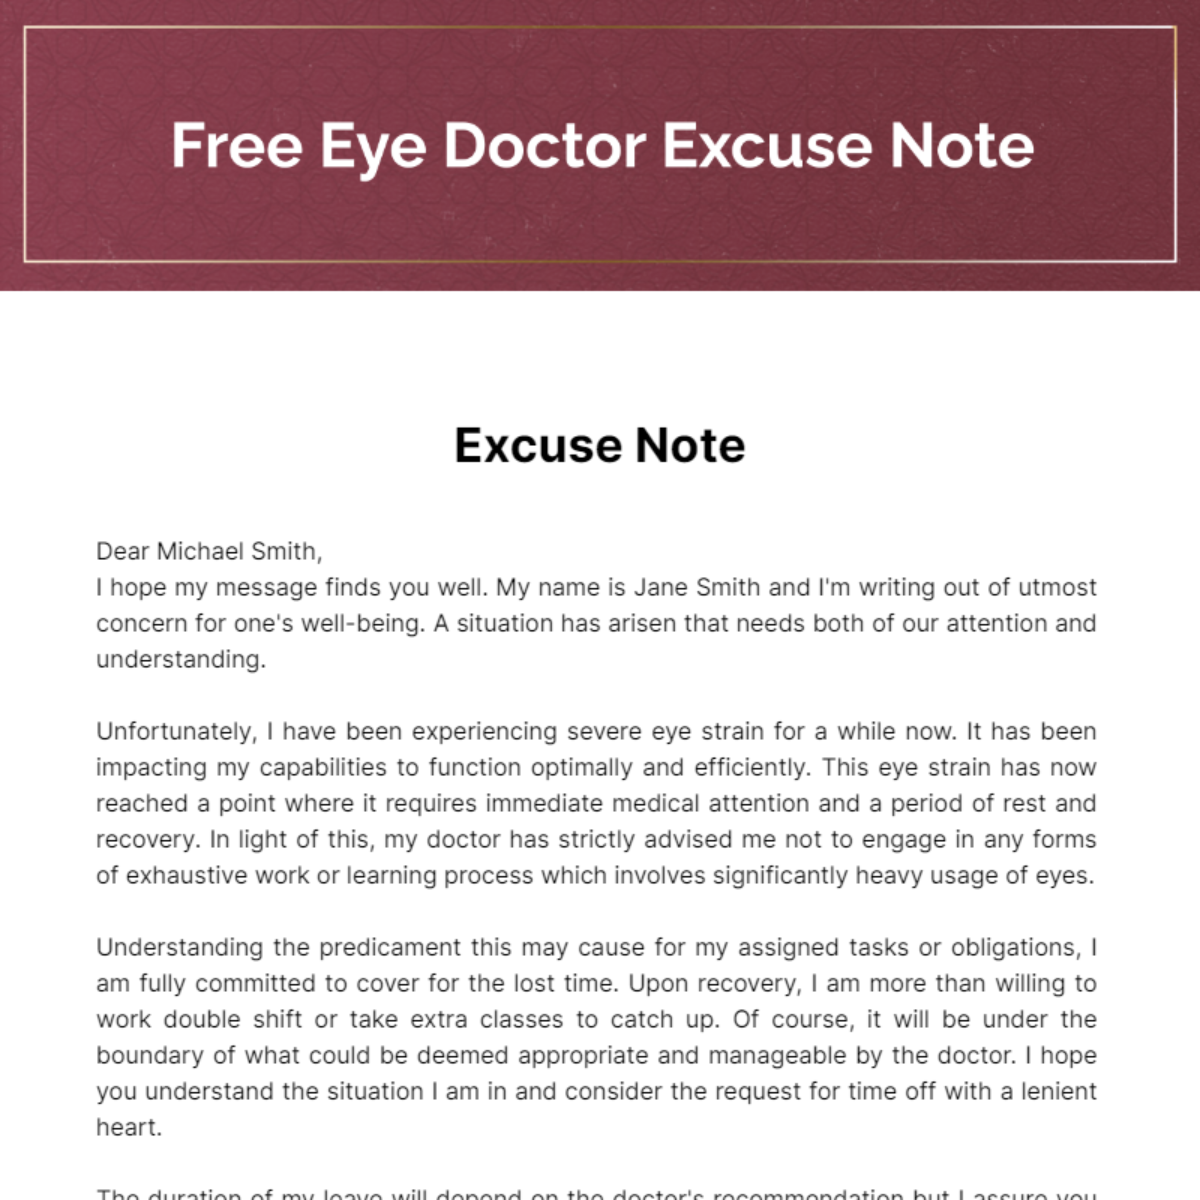 Free Eye Doctor Excuse Note Template